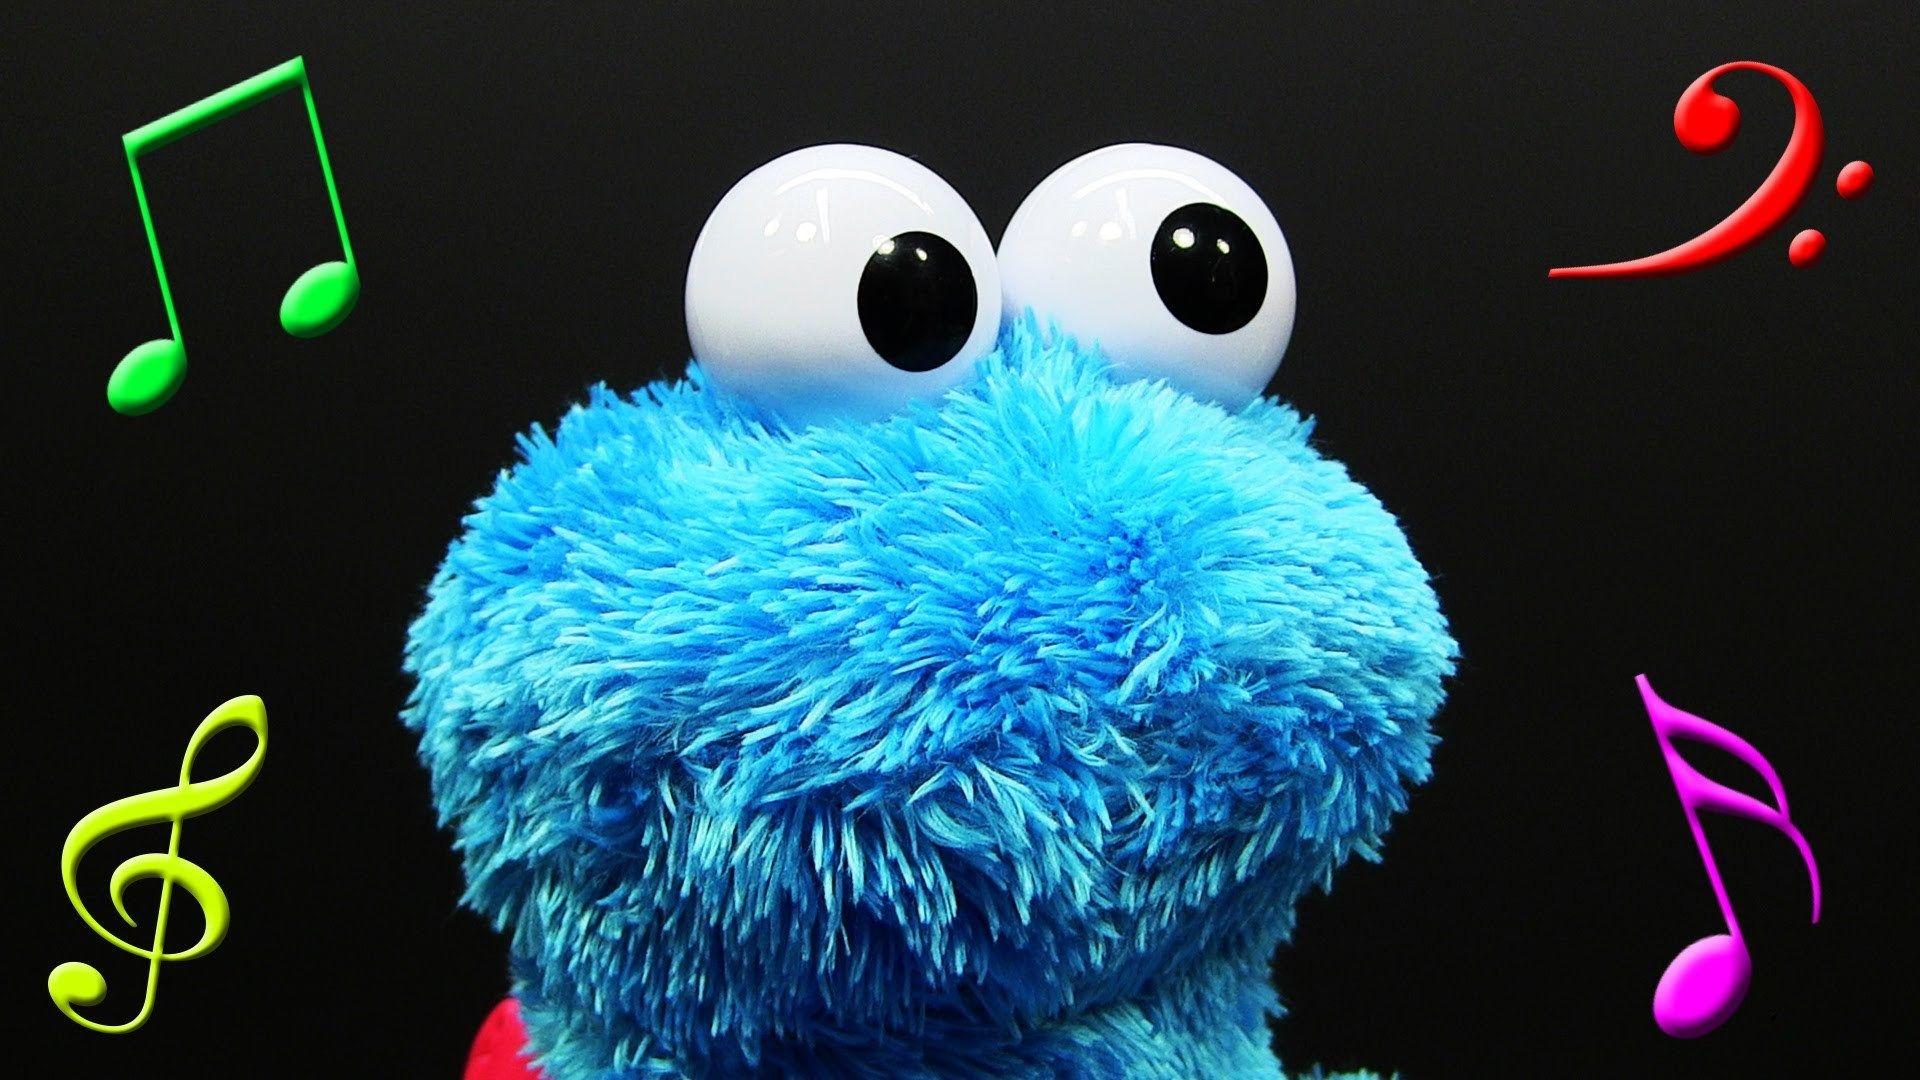 Taylor Grant cute cookie monster wallpaper x 1080